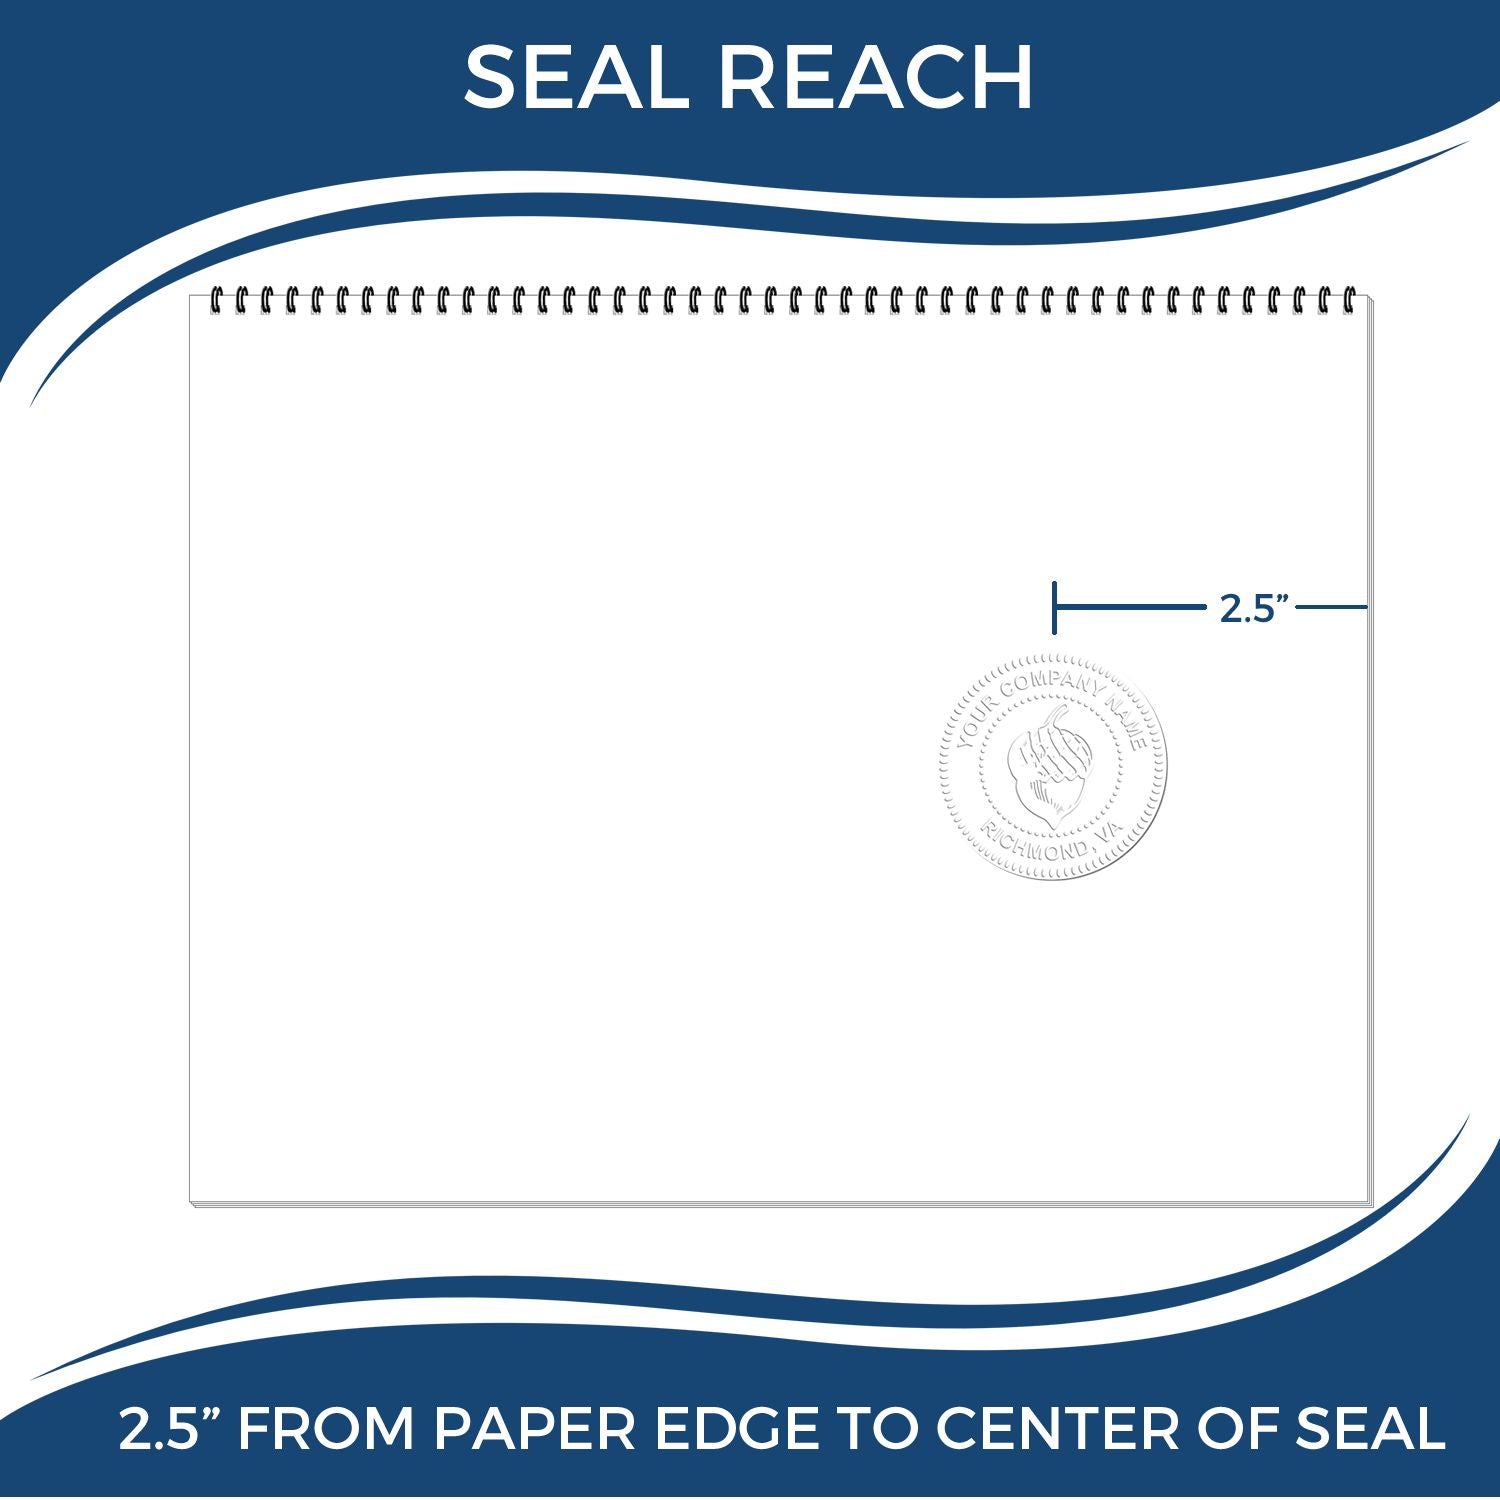 An infographic showing the seal reach which is represented by a ruler and a miniature seal image of the Long Reach Alabama PE Seal